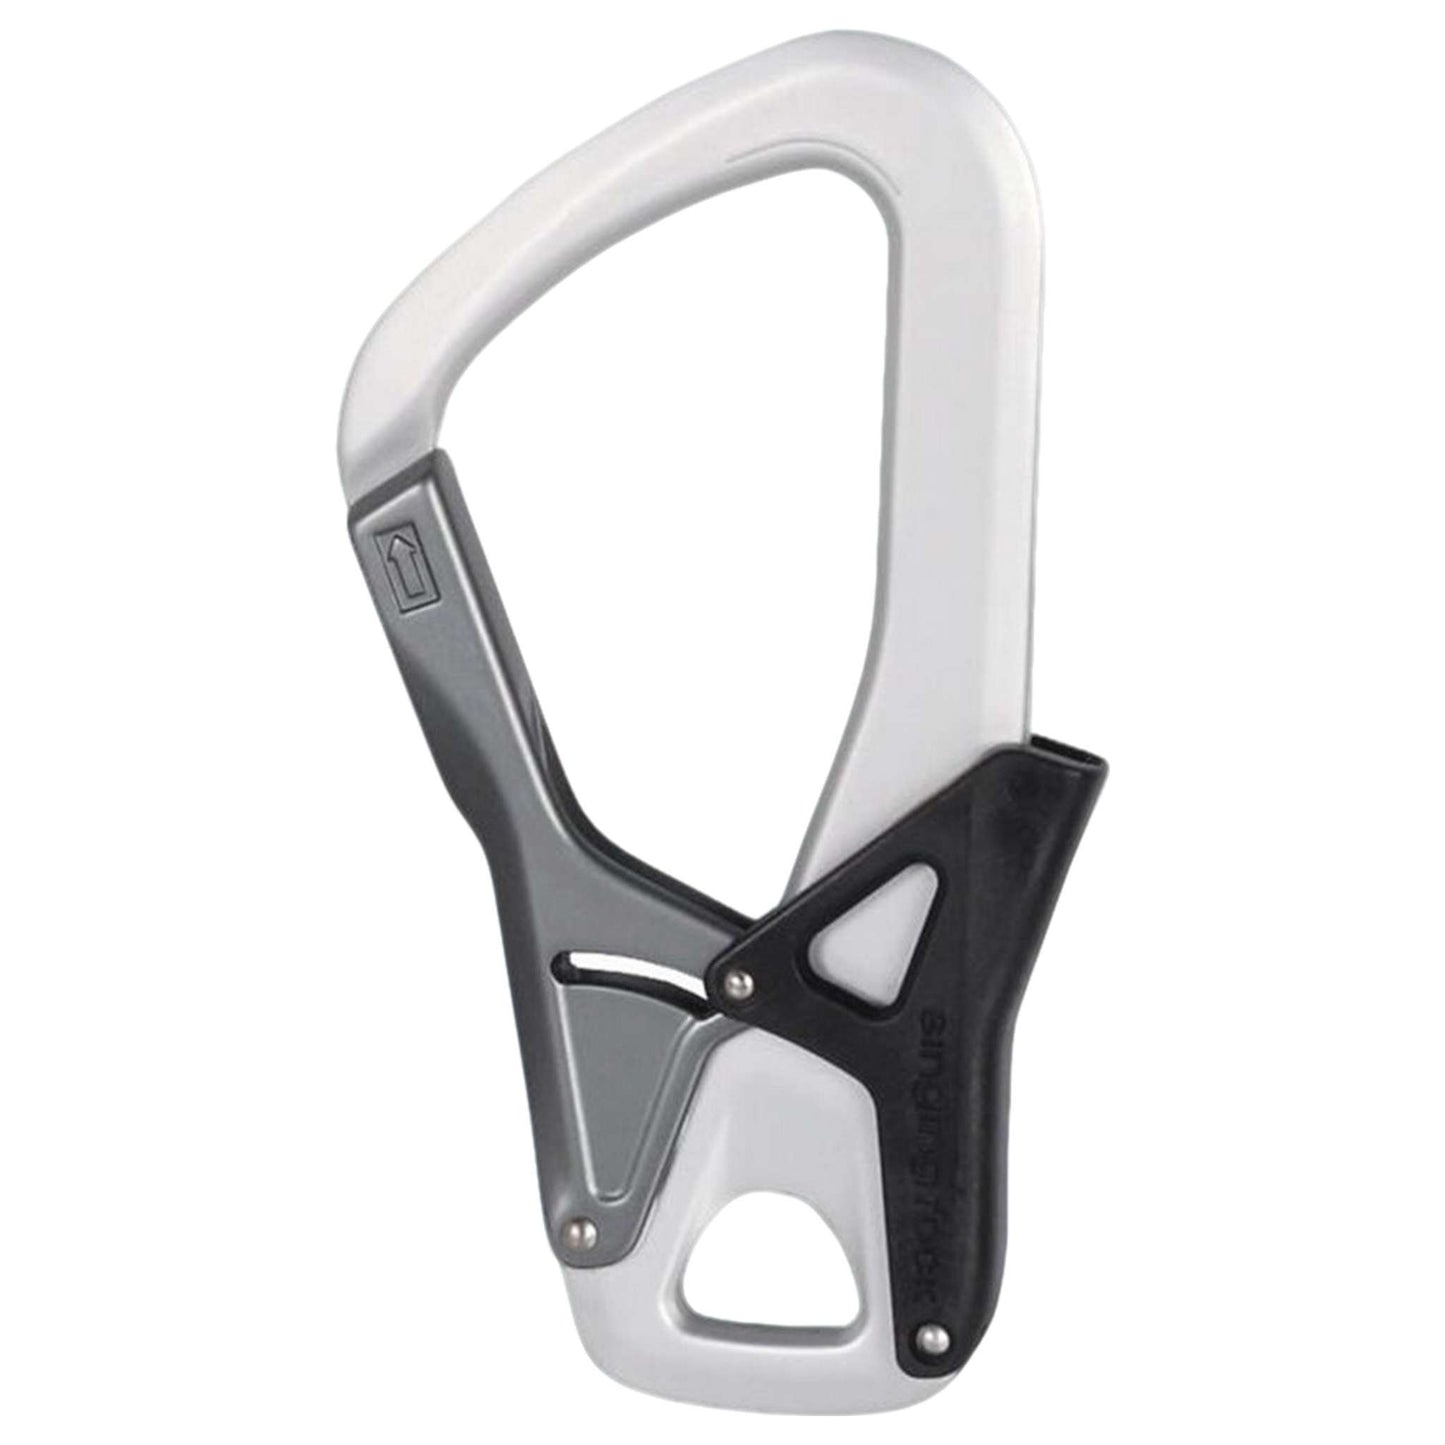 Palm Via Ferrata Carabiner - Double Action, Hot Forged, High Strength